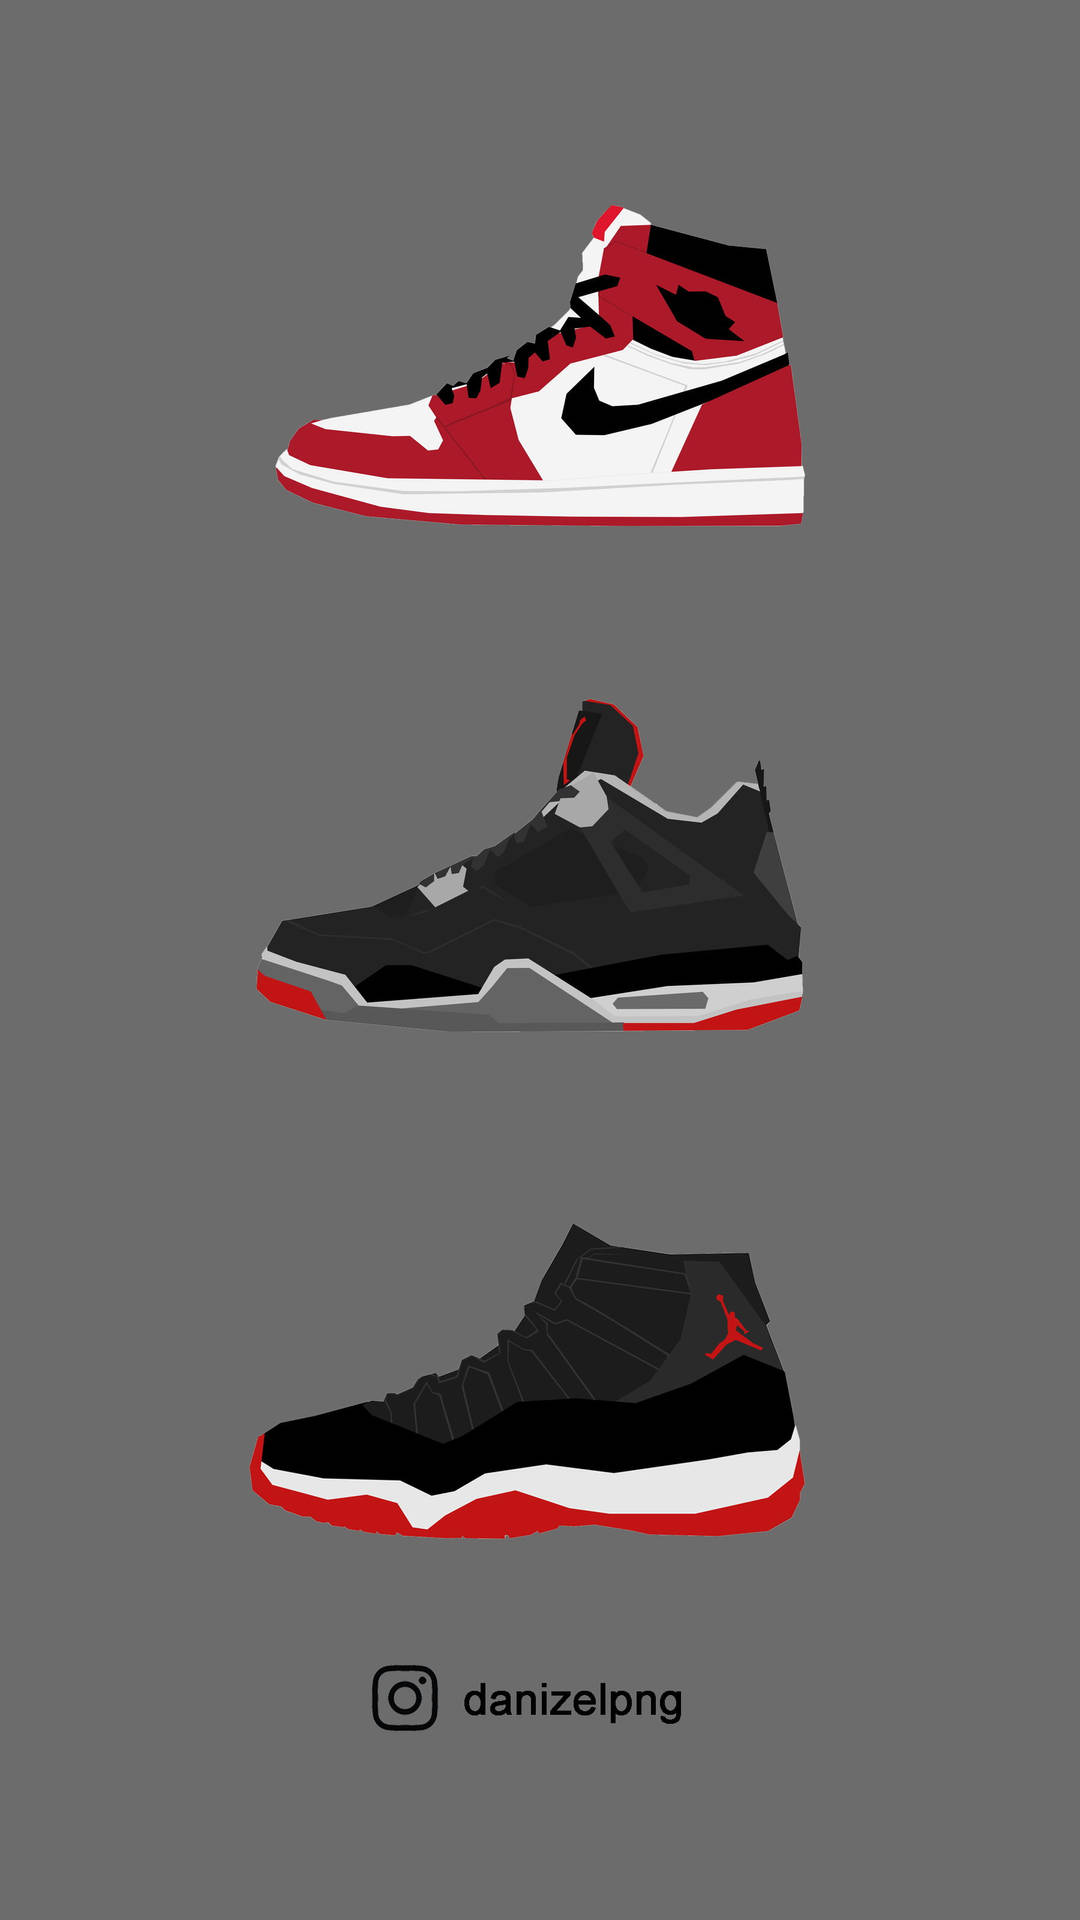 Caption: Stay A Step Ahead With The Iconic Nike Jordan 1 Sneakers Background